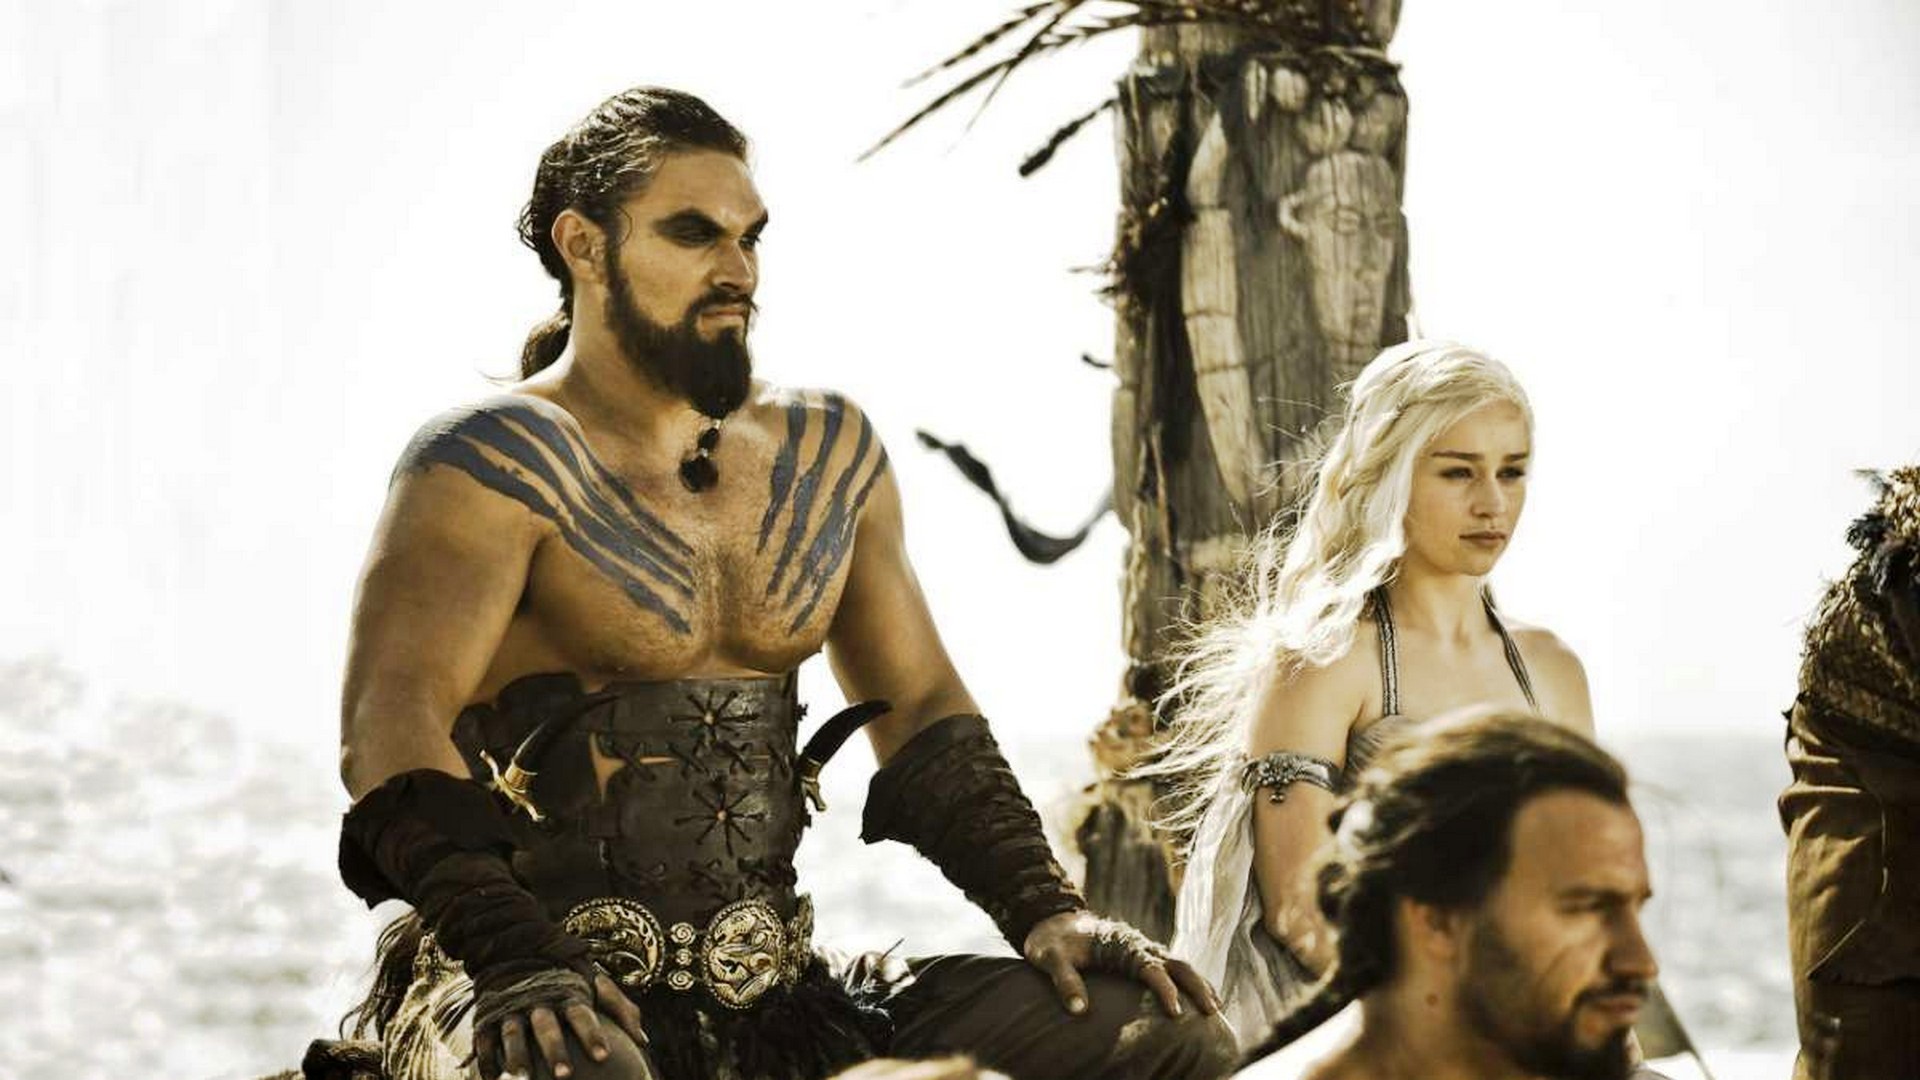 Game of Thrones Khal Drogo Wallpaper HD with high-resolution 1920x1080 pixel. You can use this poster wallpaper for your Desktop Computers, Mac Screensavers, Windows Backgrounds, iPhone Wallpapers, Tablet or Android Lock screen and another Mobile device